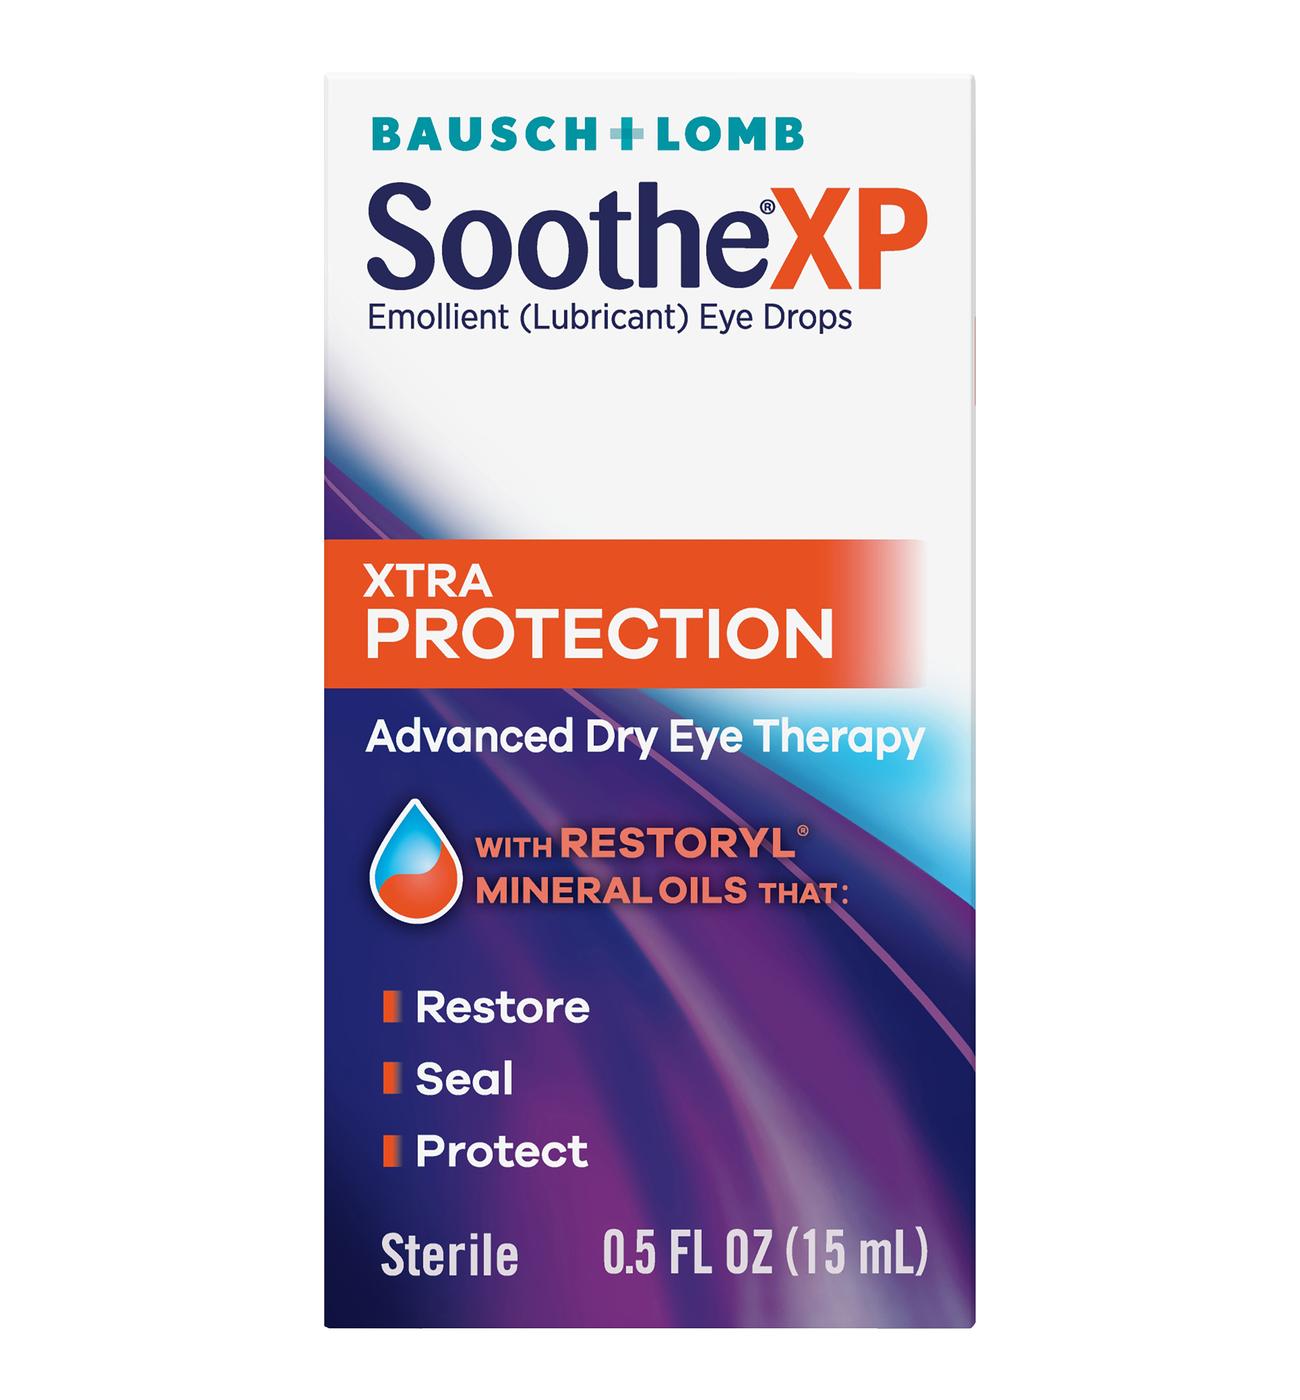 Bausch & Lomb Soothe XP Emollient Lubricant Eye Drops; image 1 of 4